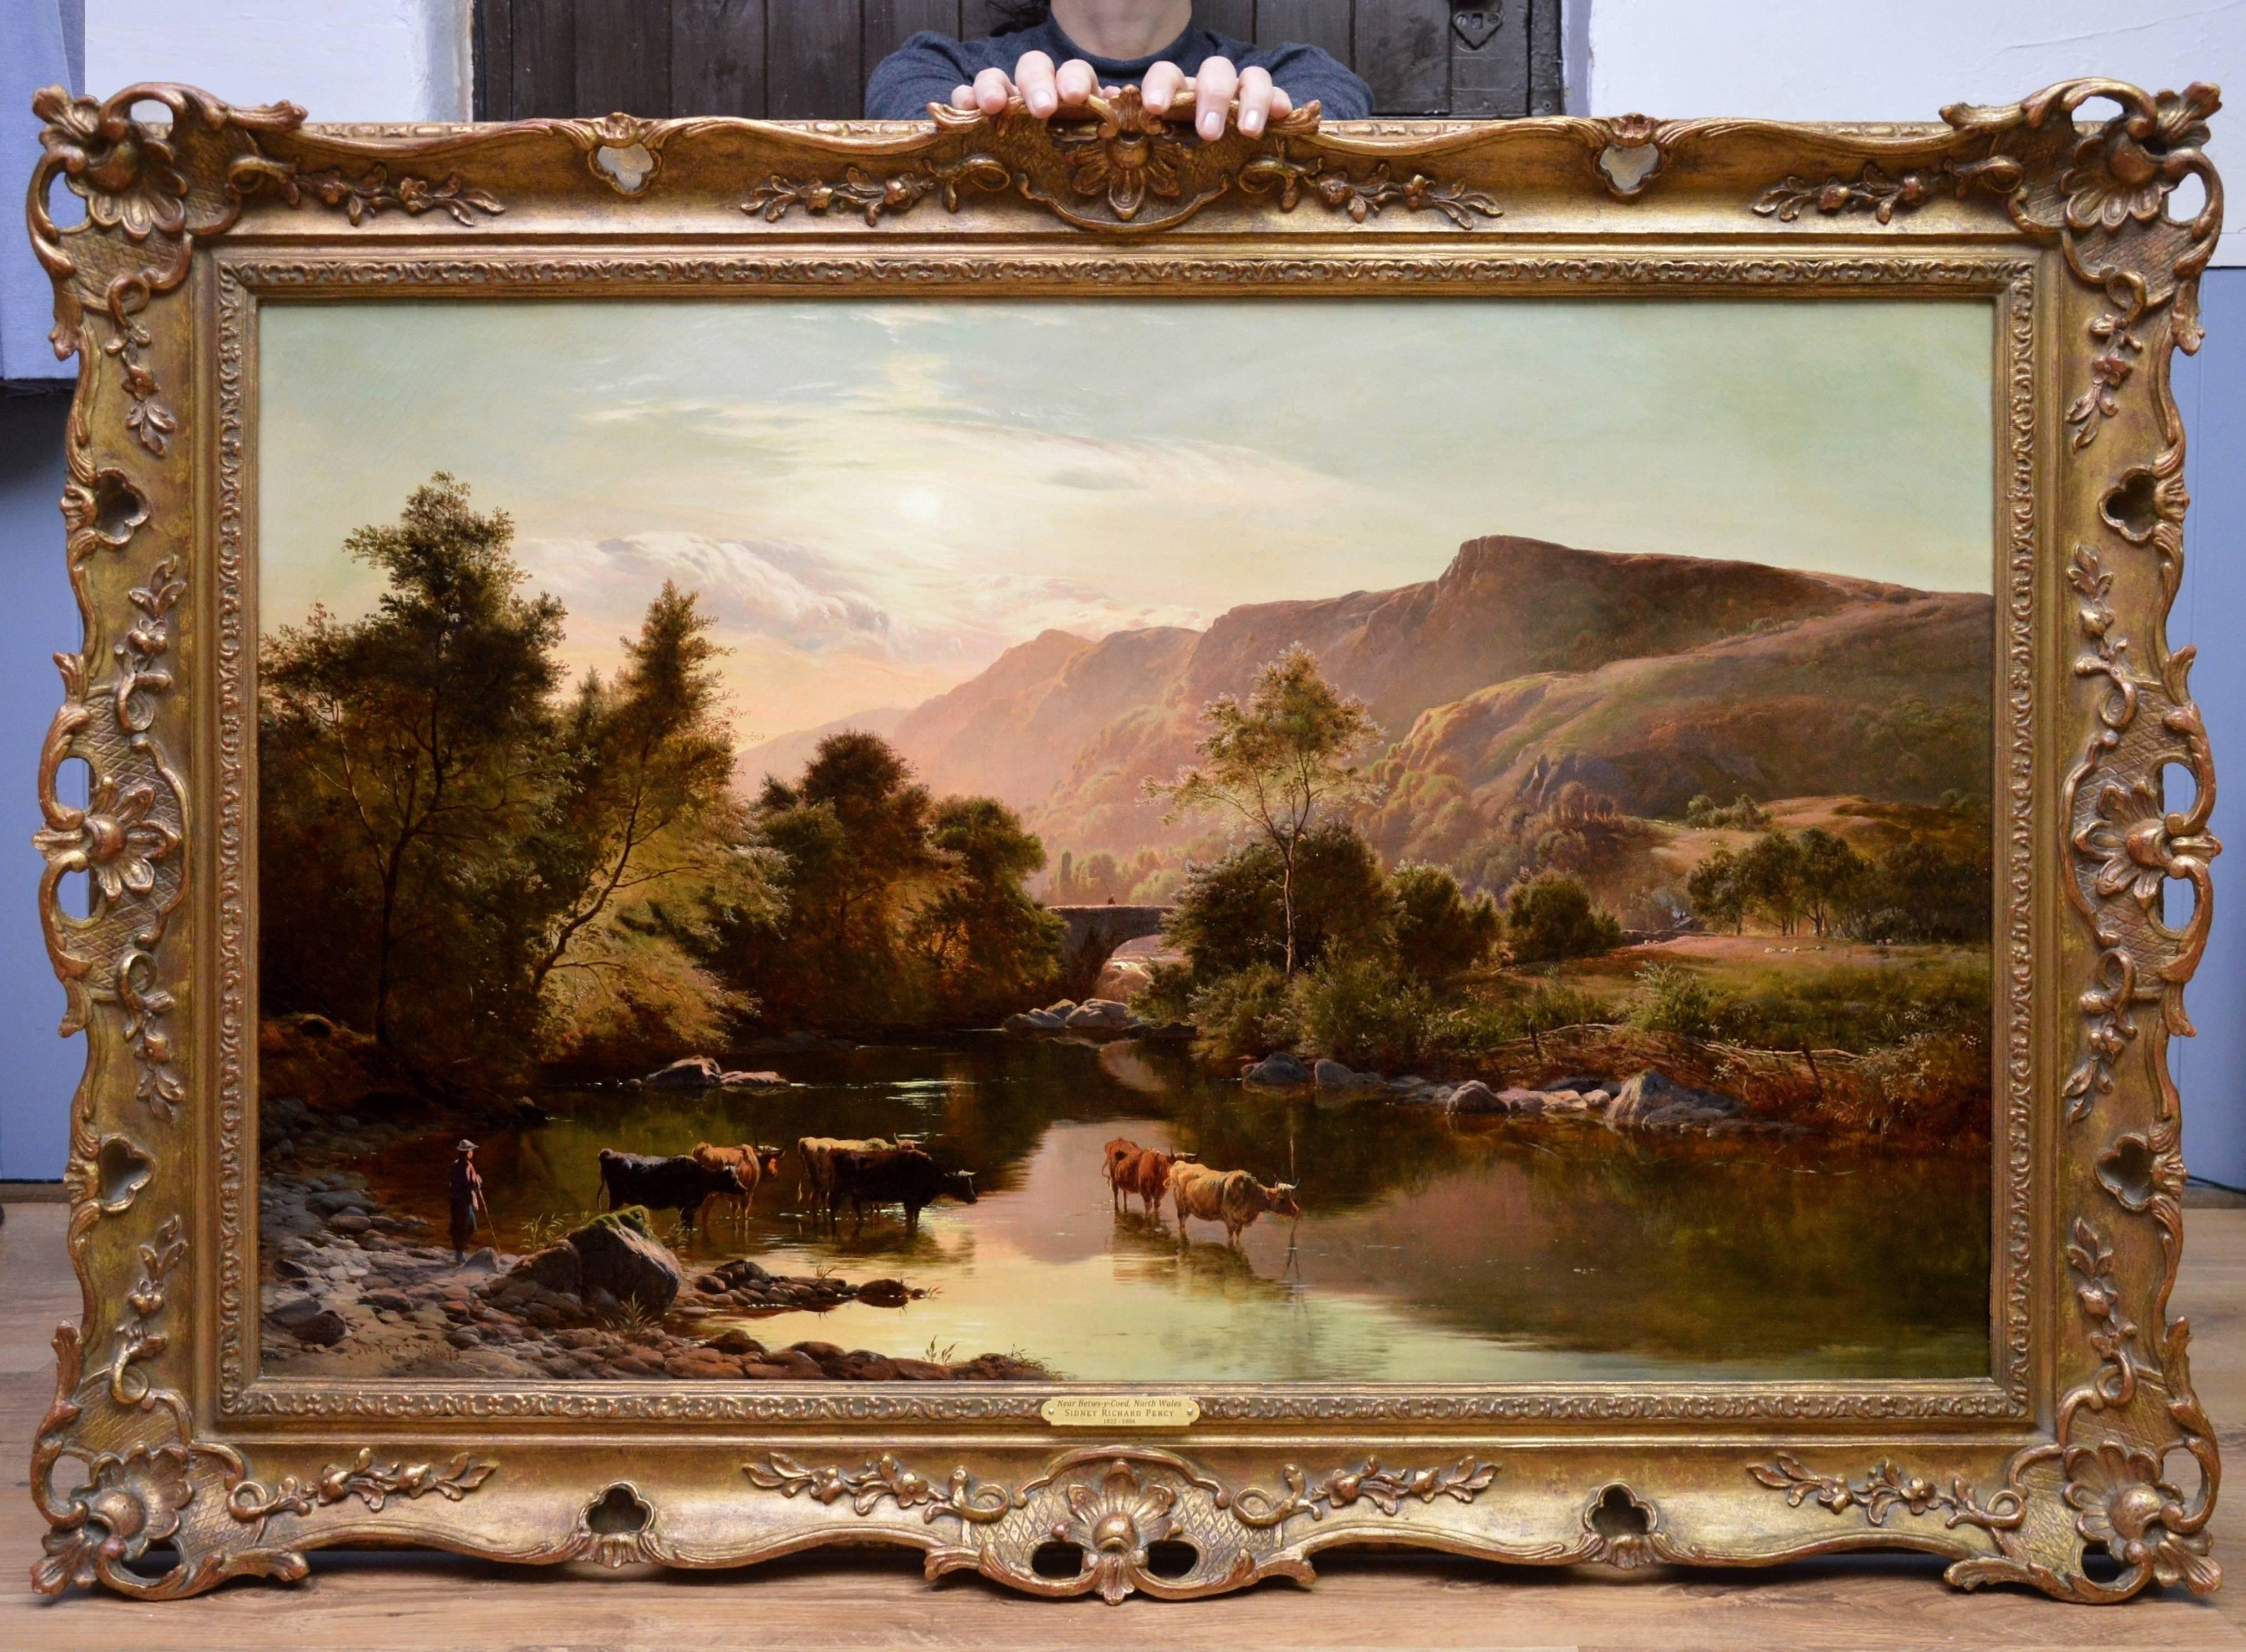 Betws-y-Coed, North Wales - Large 19th Century Oil Painting Sidney Richard Percy 1